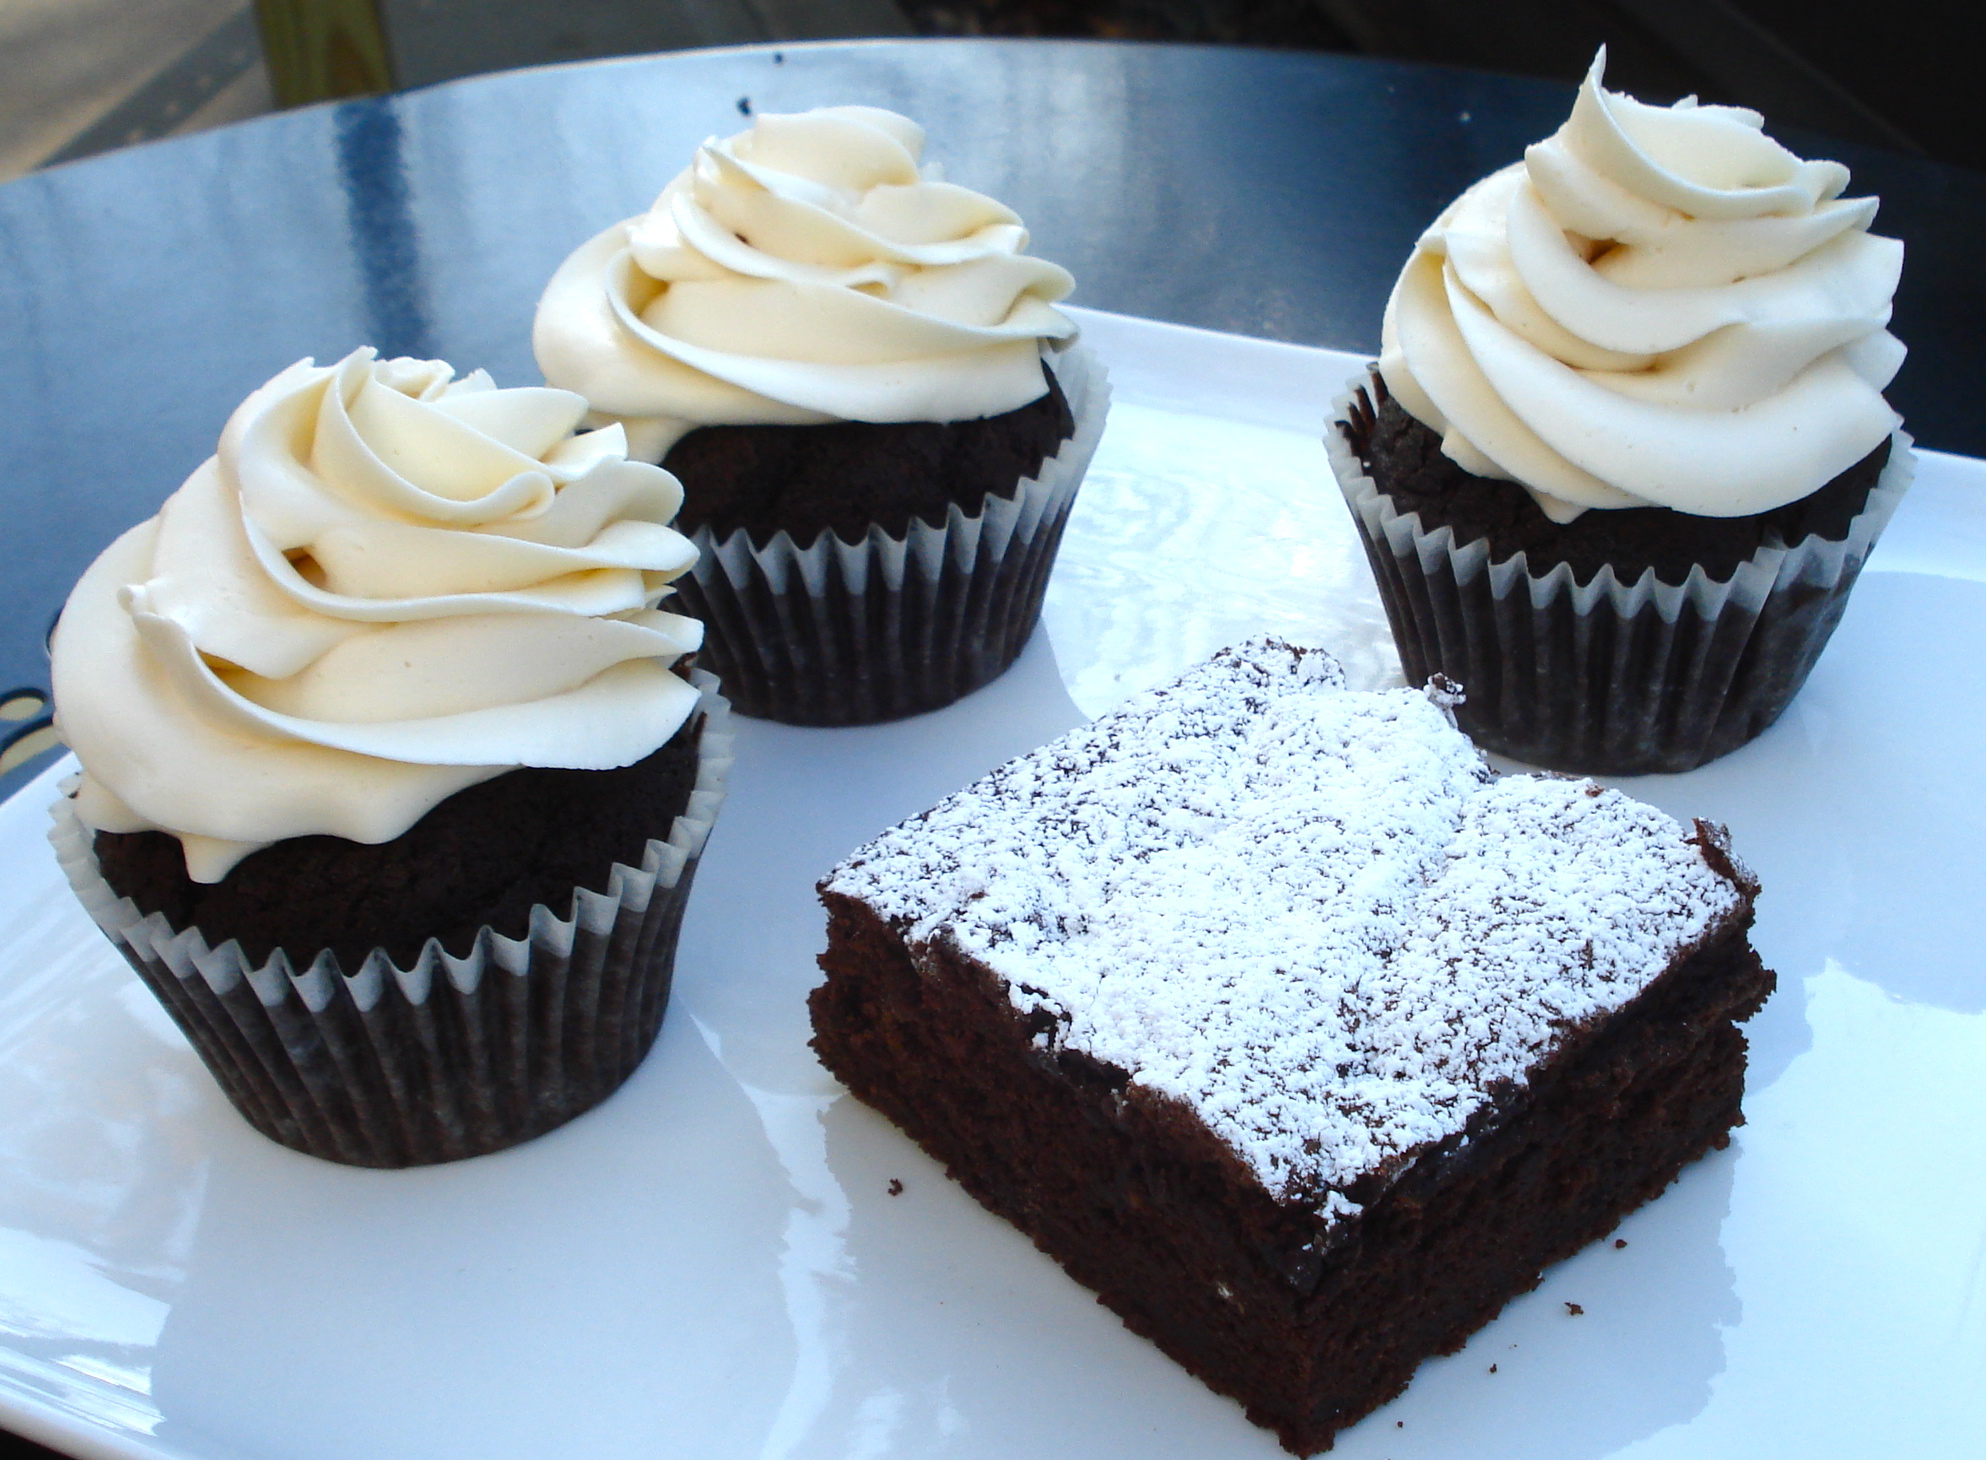 guiness-brownie-and-stout-cupcakes-with-wiskey-ganache-and-baileys-irish-cream-frosting1.jpg 